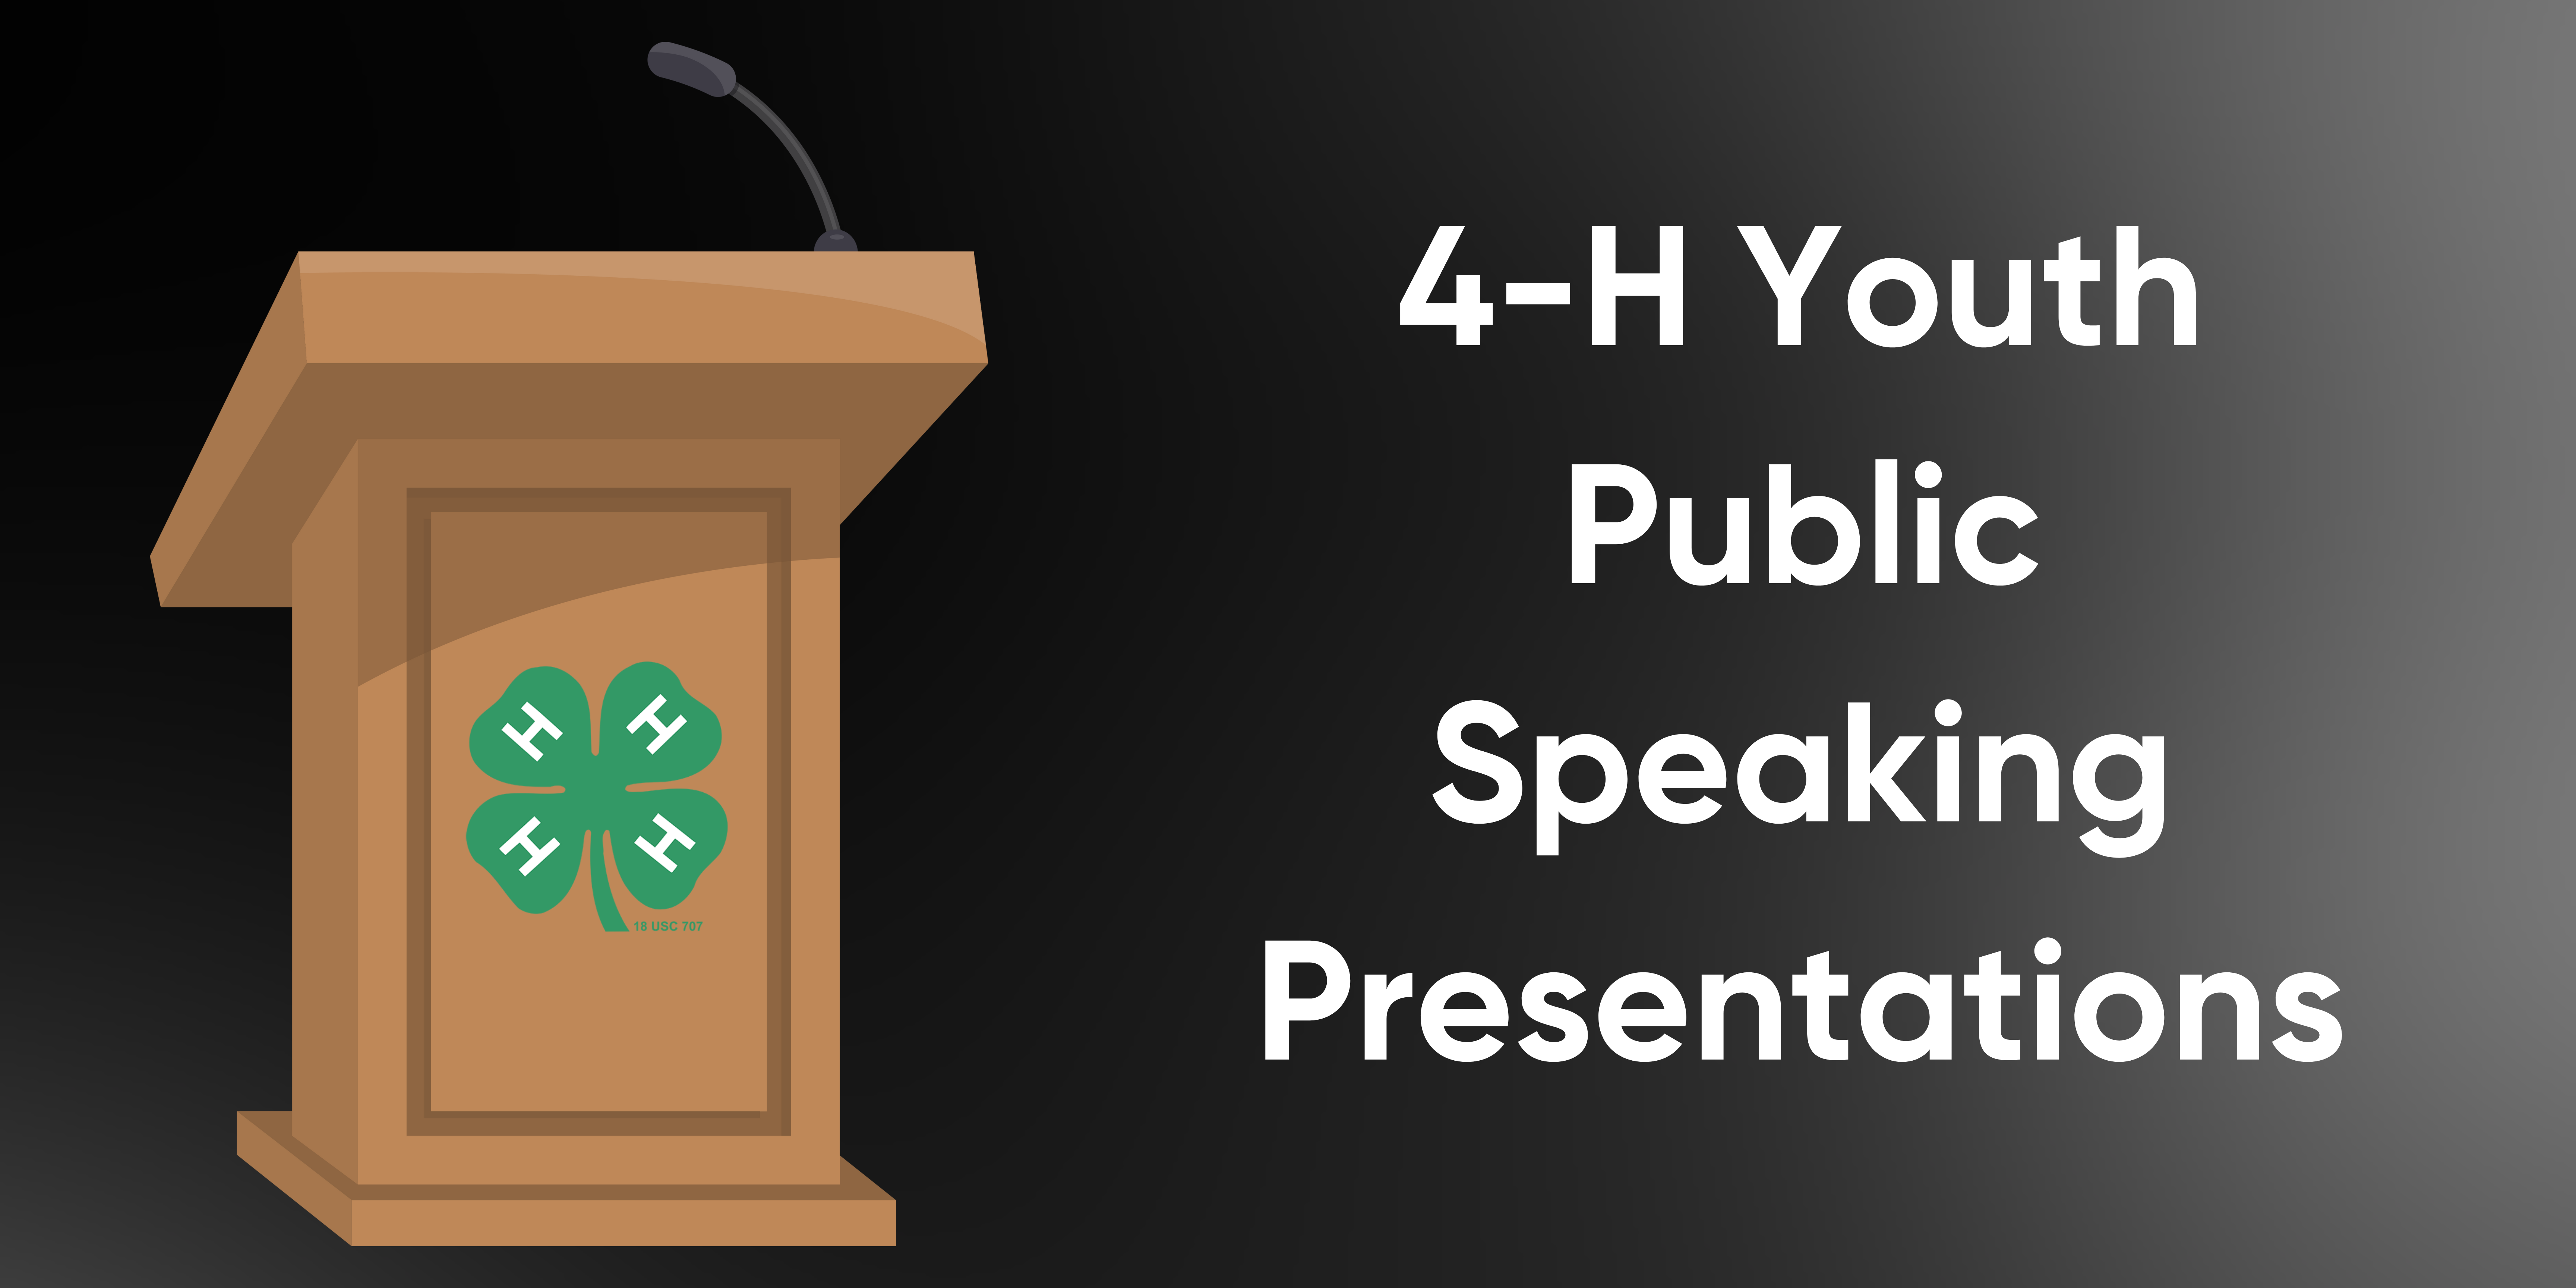 4-H Youth Public Speaking Presentations